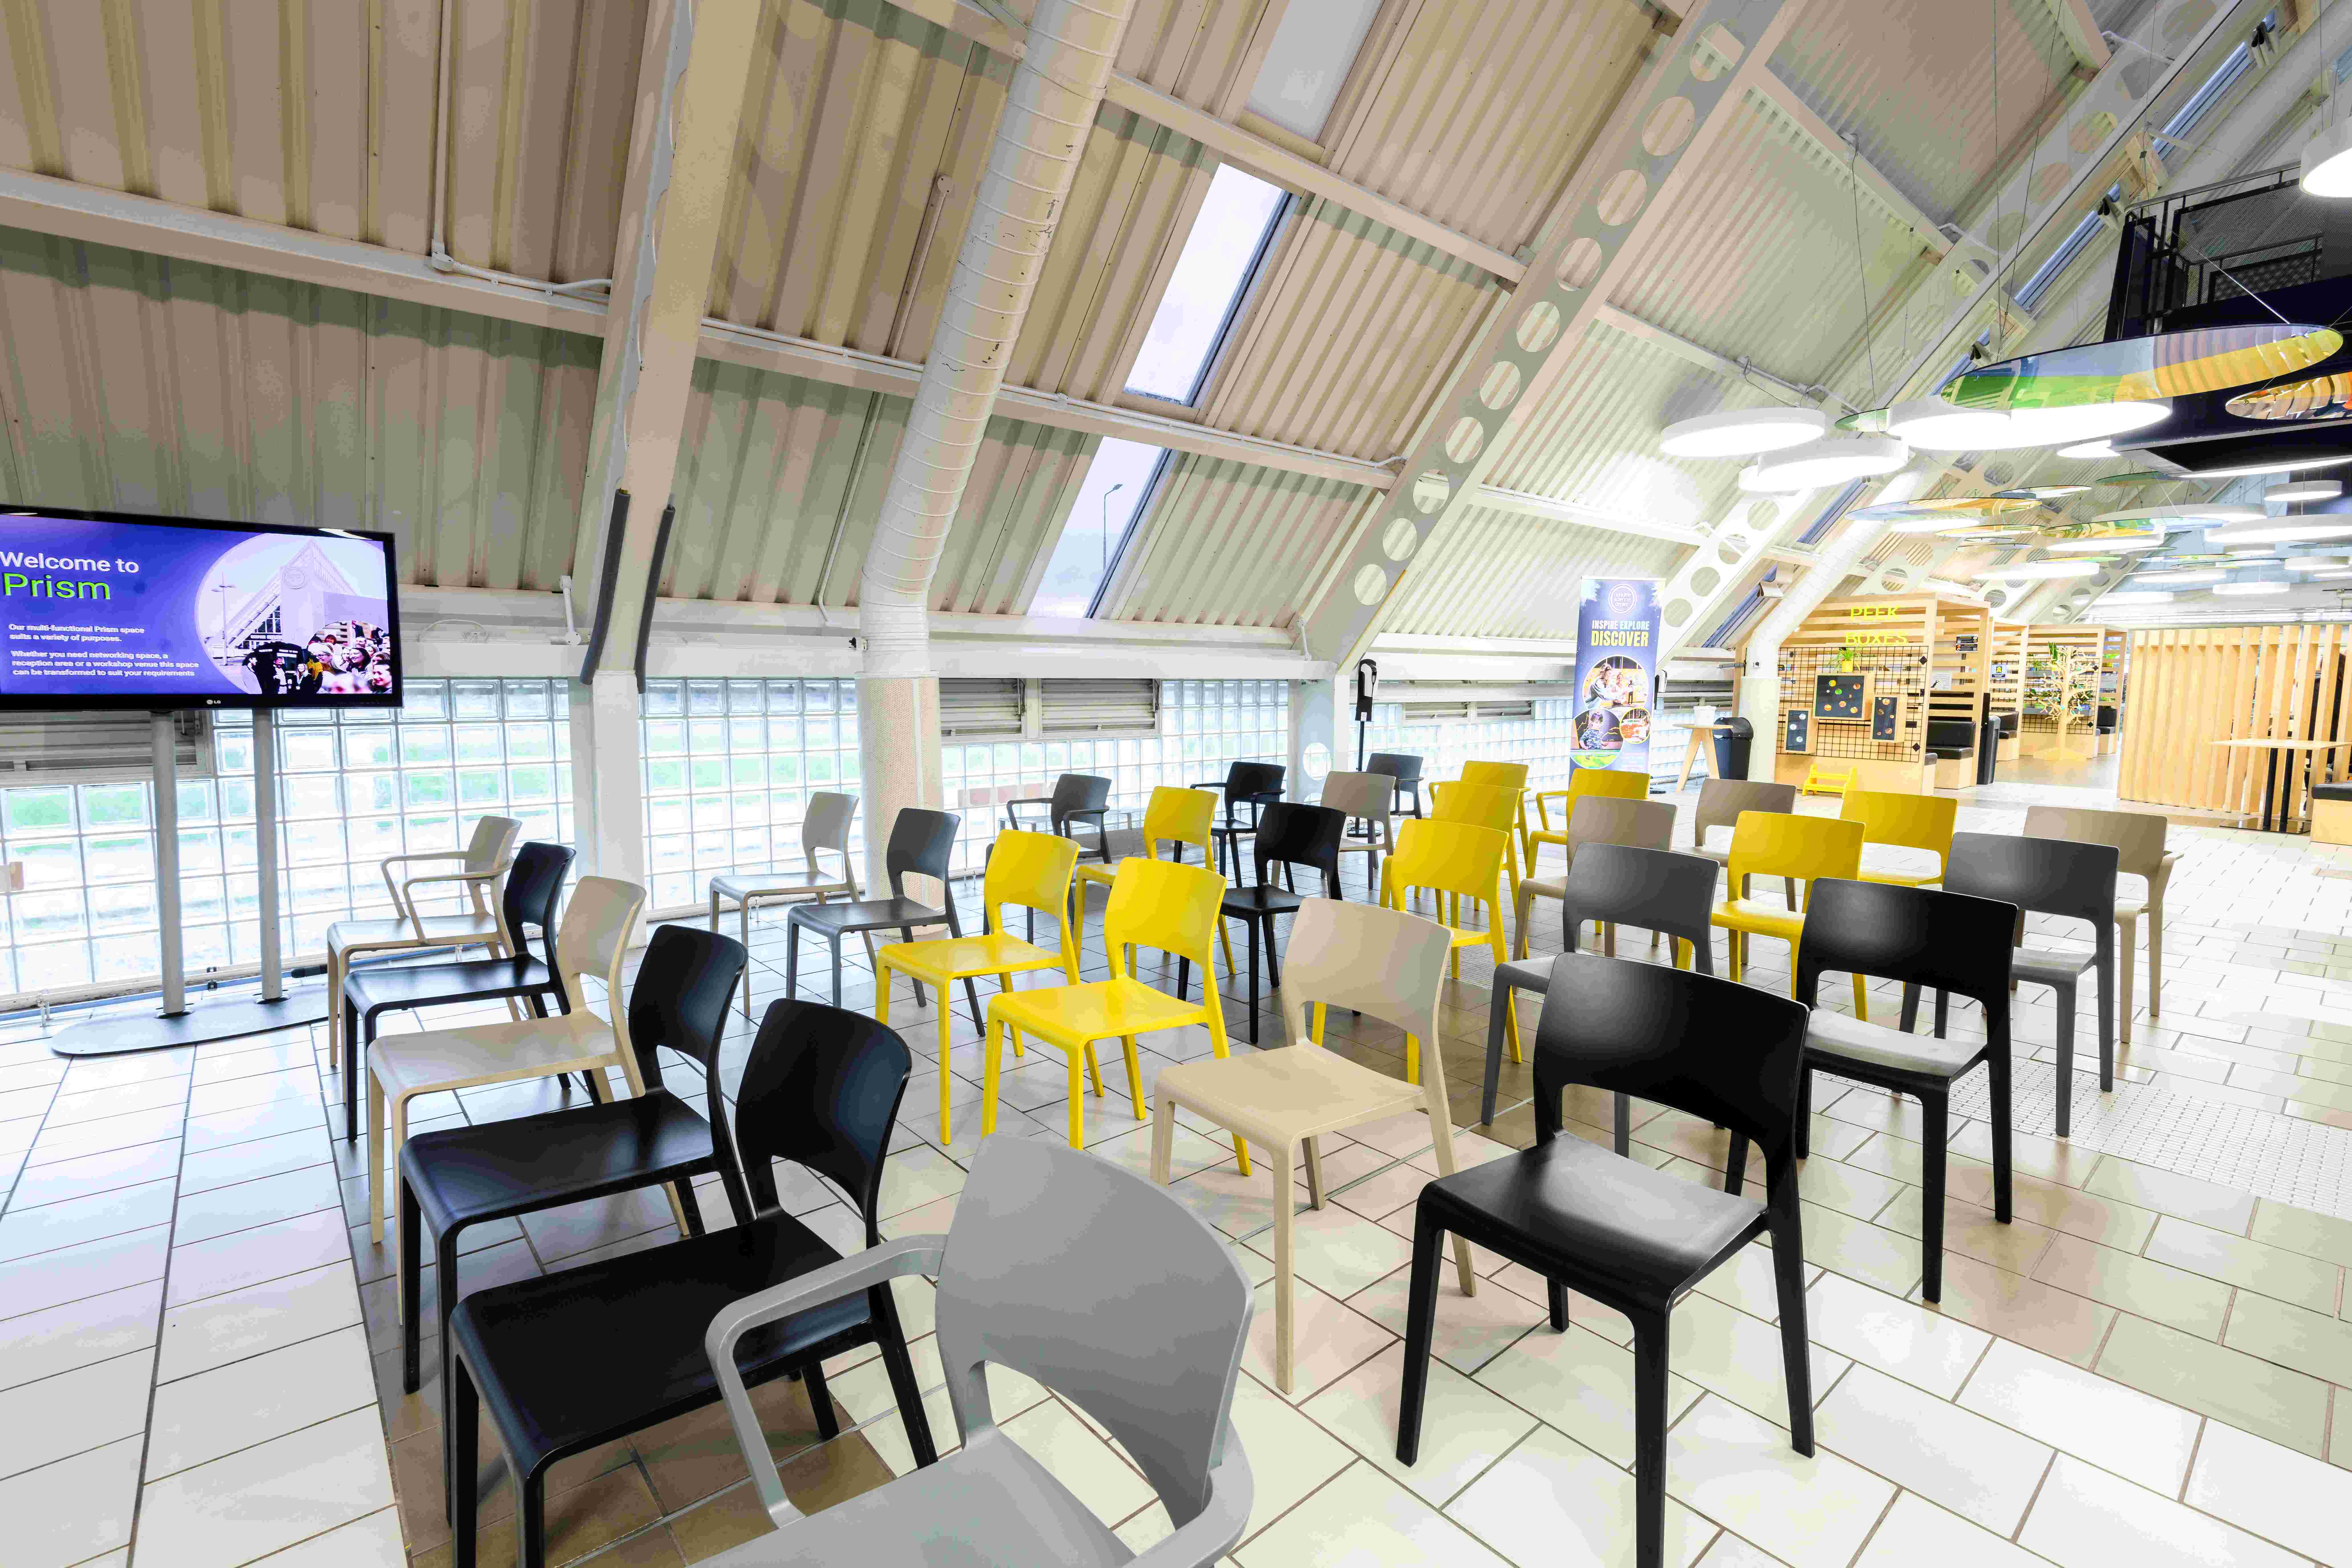 Reverse image of Prism event space